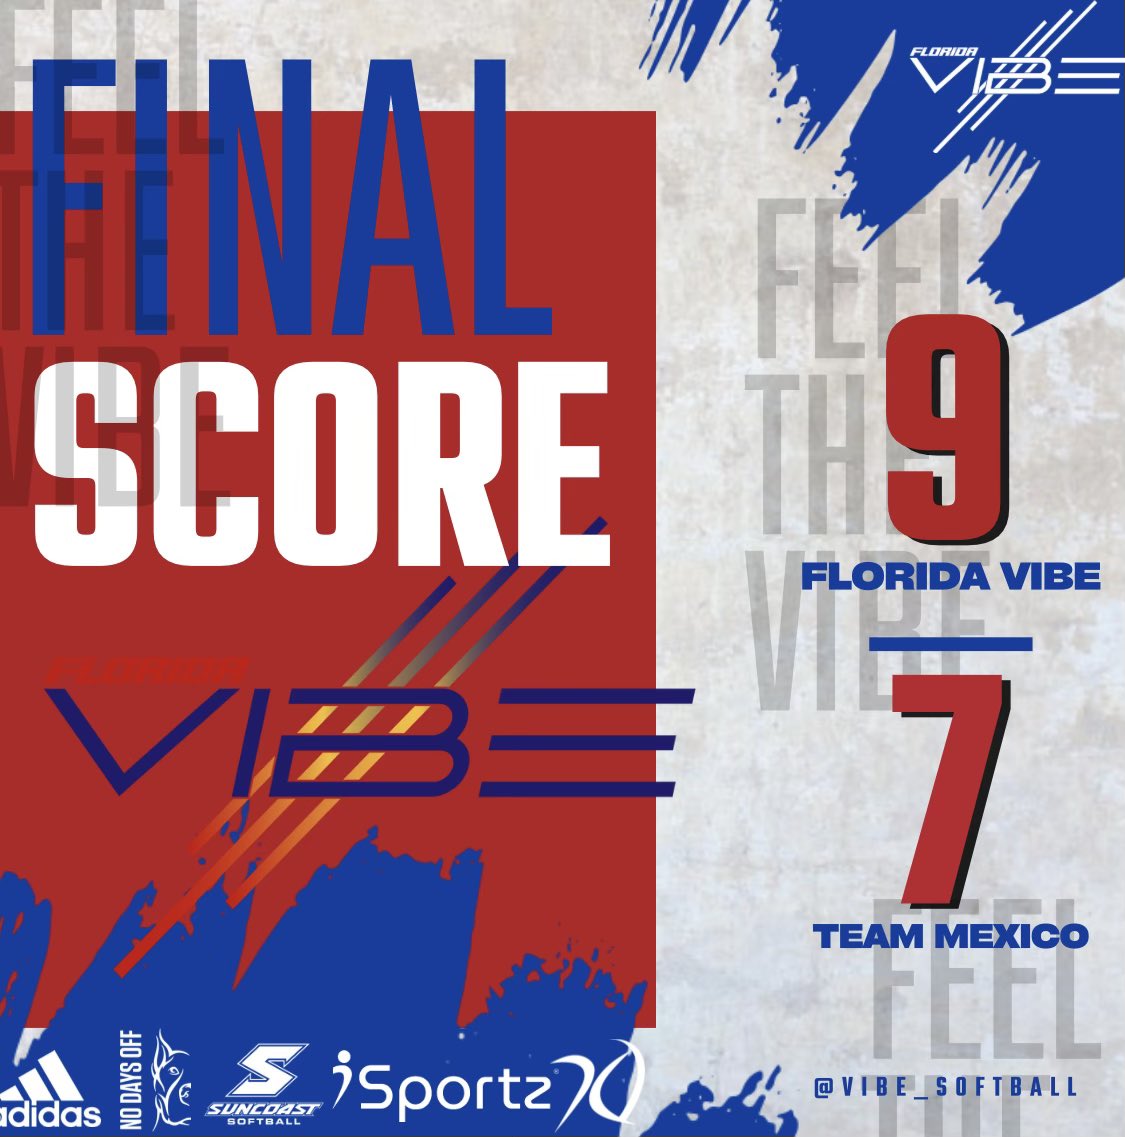 Your Florida VIBE takes game #2 in the night cap!  @a_prange @Neleigh_Herring @KaraCanetto break it open late to seal the deal! 

#feelthevibe #americasteam #adidasdugout